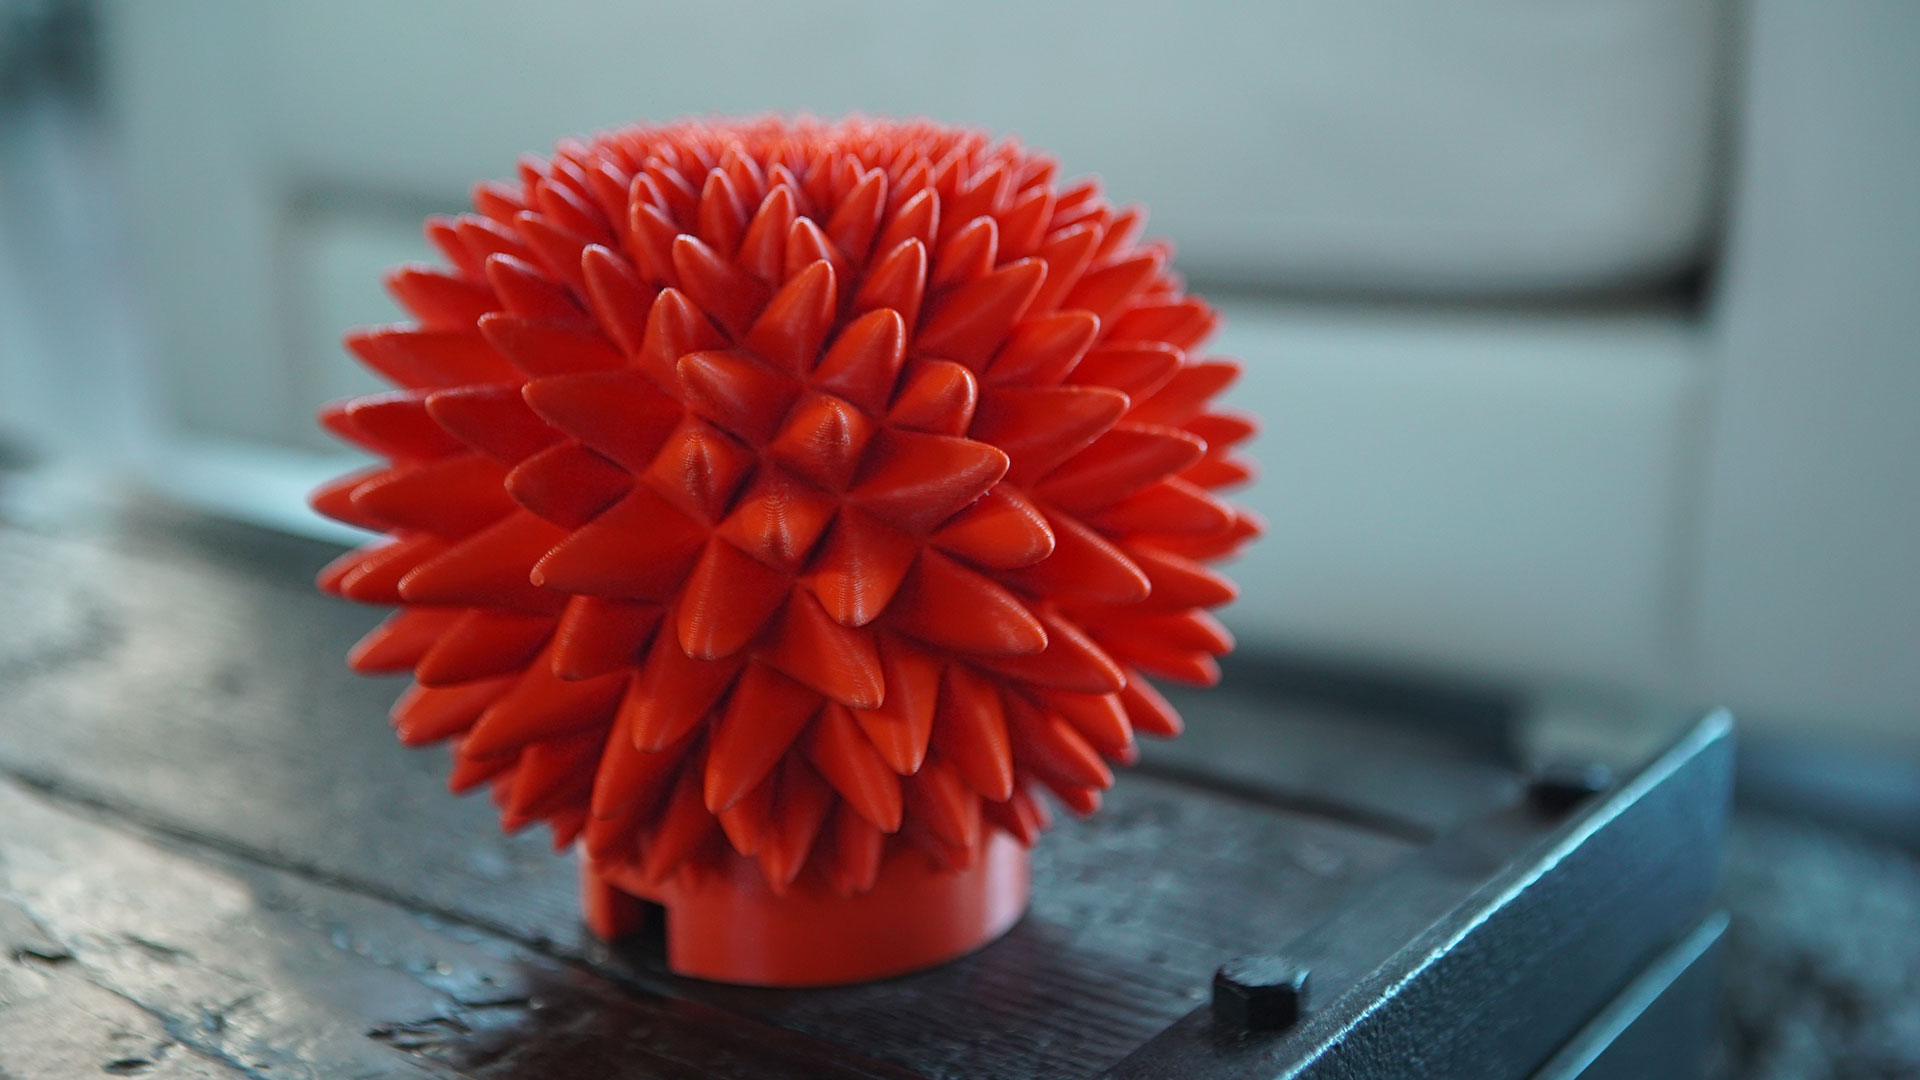 3D Printing for Designs and Artwork